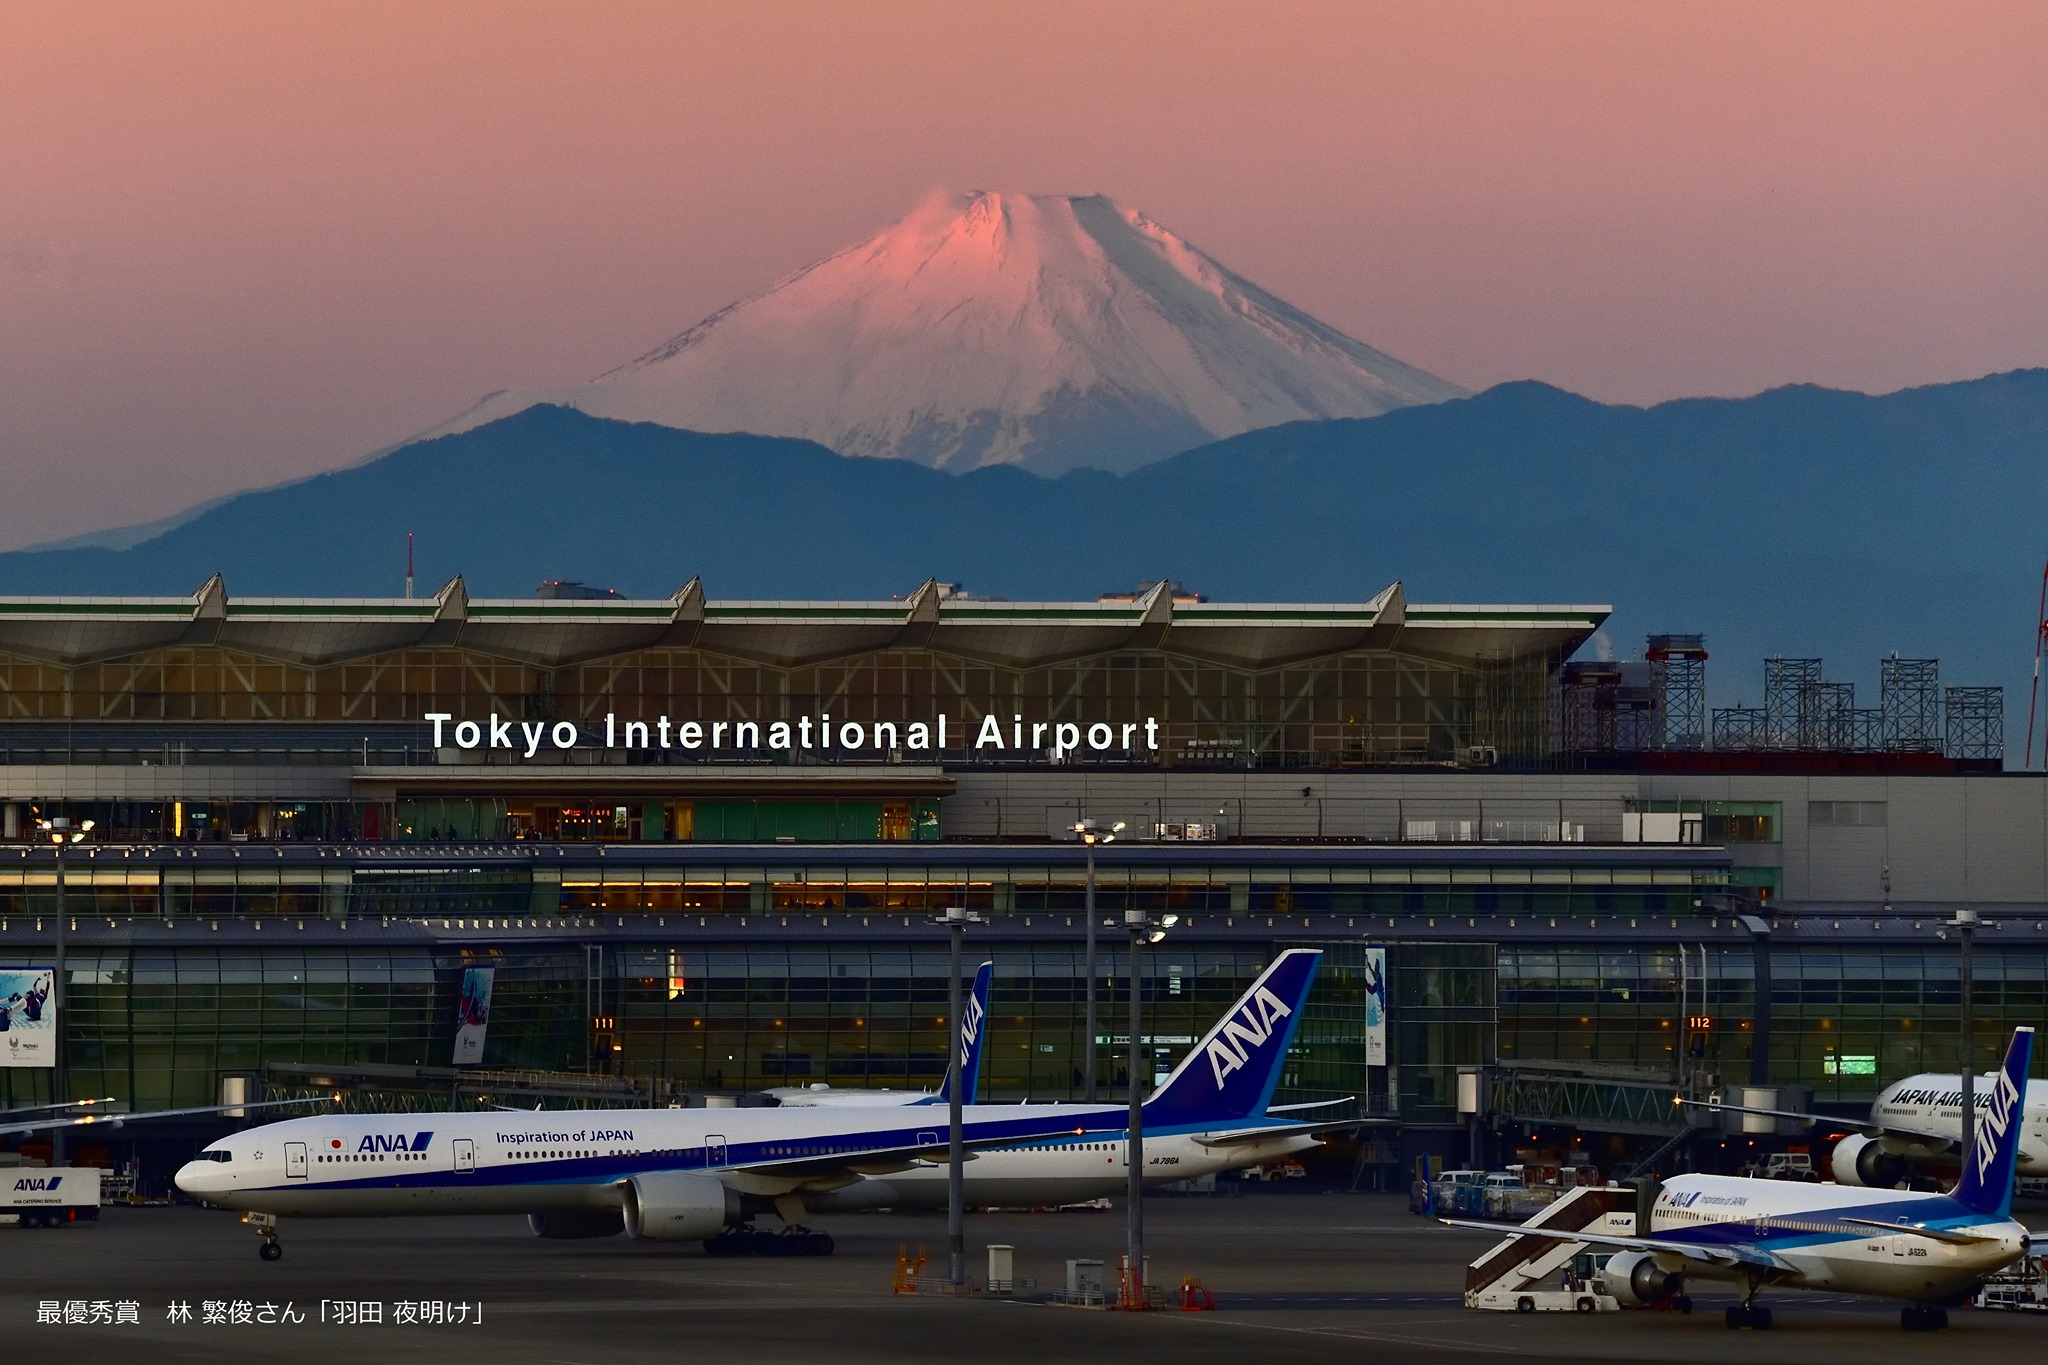 Tokyo Haneda Airport rated second best airport in the world by Skytrax in the World's best airports awards. © Haneda Airport